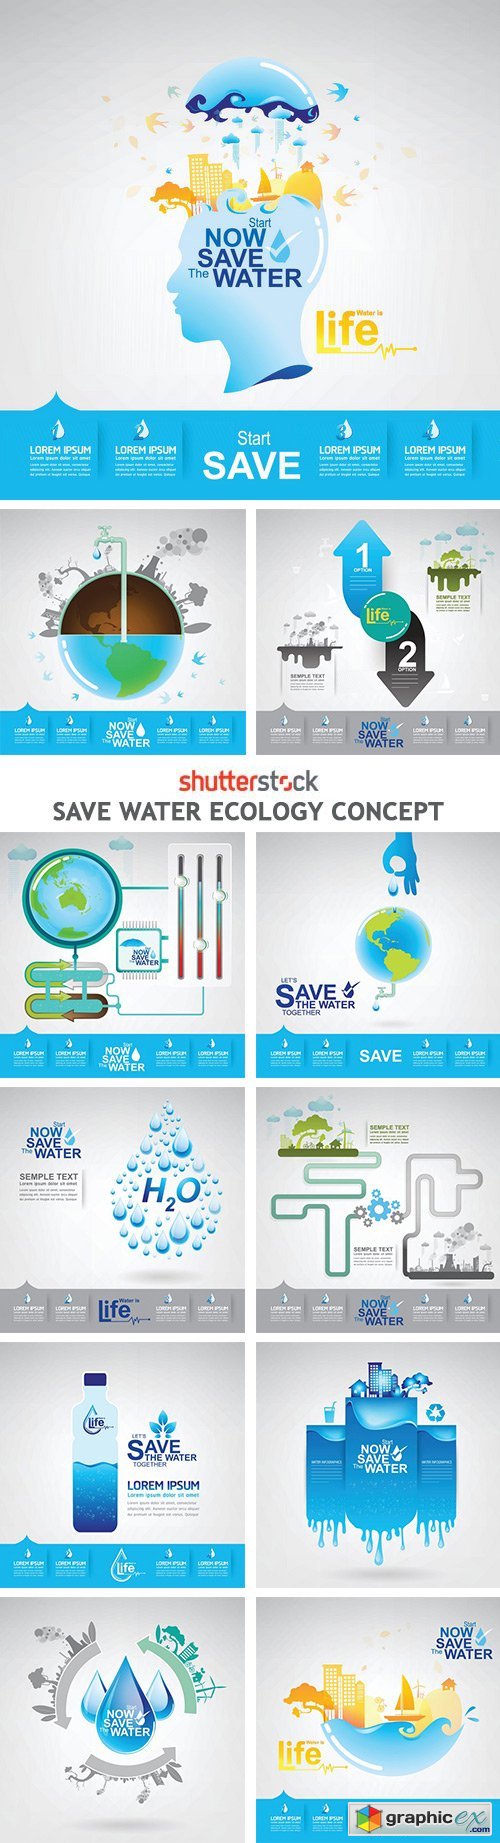 Save Water Ecology Concept - 25xEPS